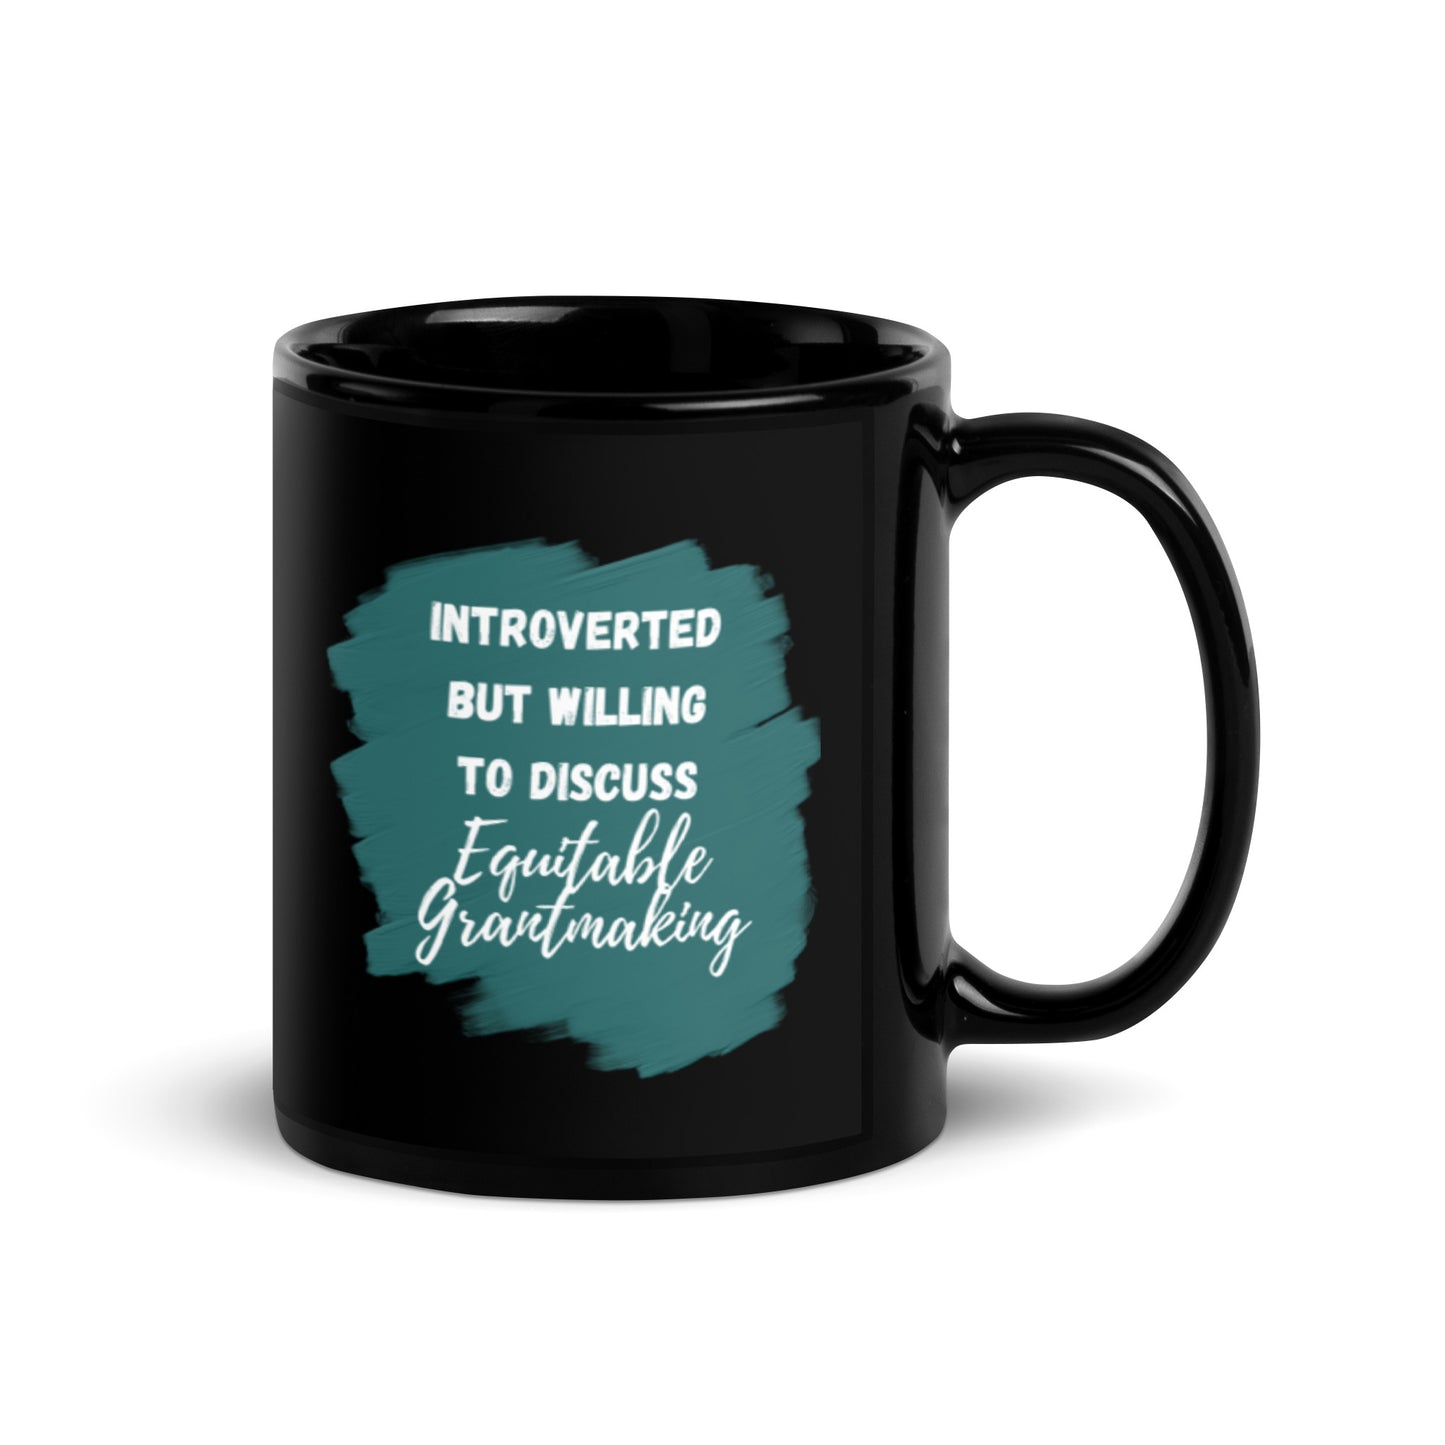 Introverted but Willing to Discuss Equitable Grantmaking Black Glossy Mug 11oz